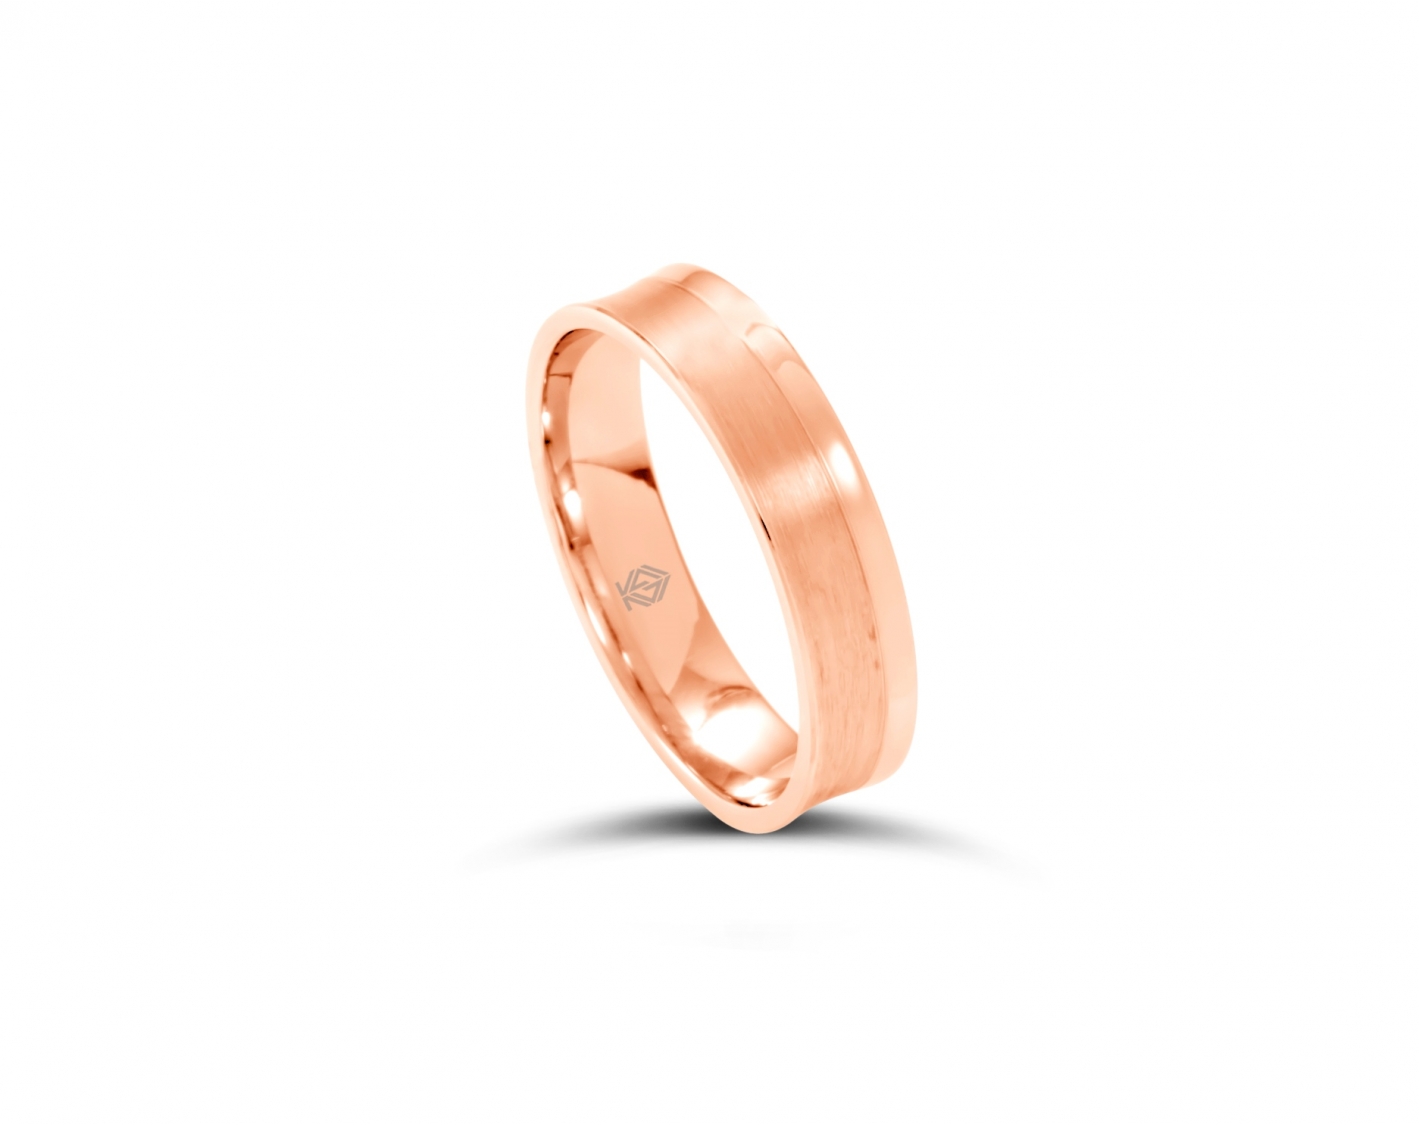 18k rose gold 5,5mm two-toned* wedding band with colored edges